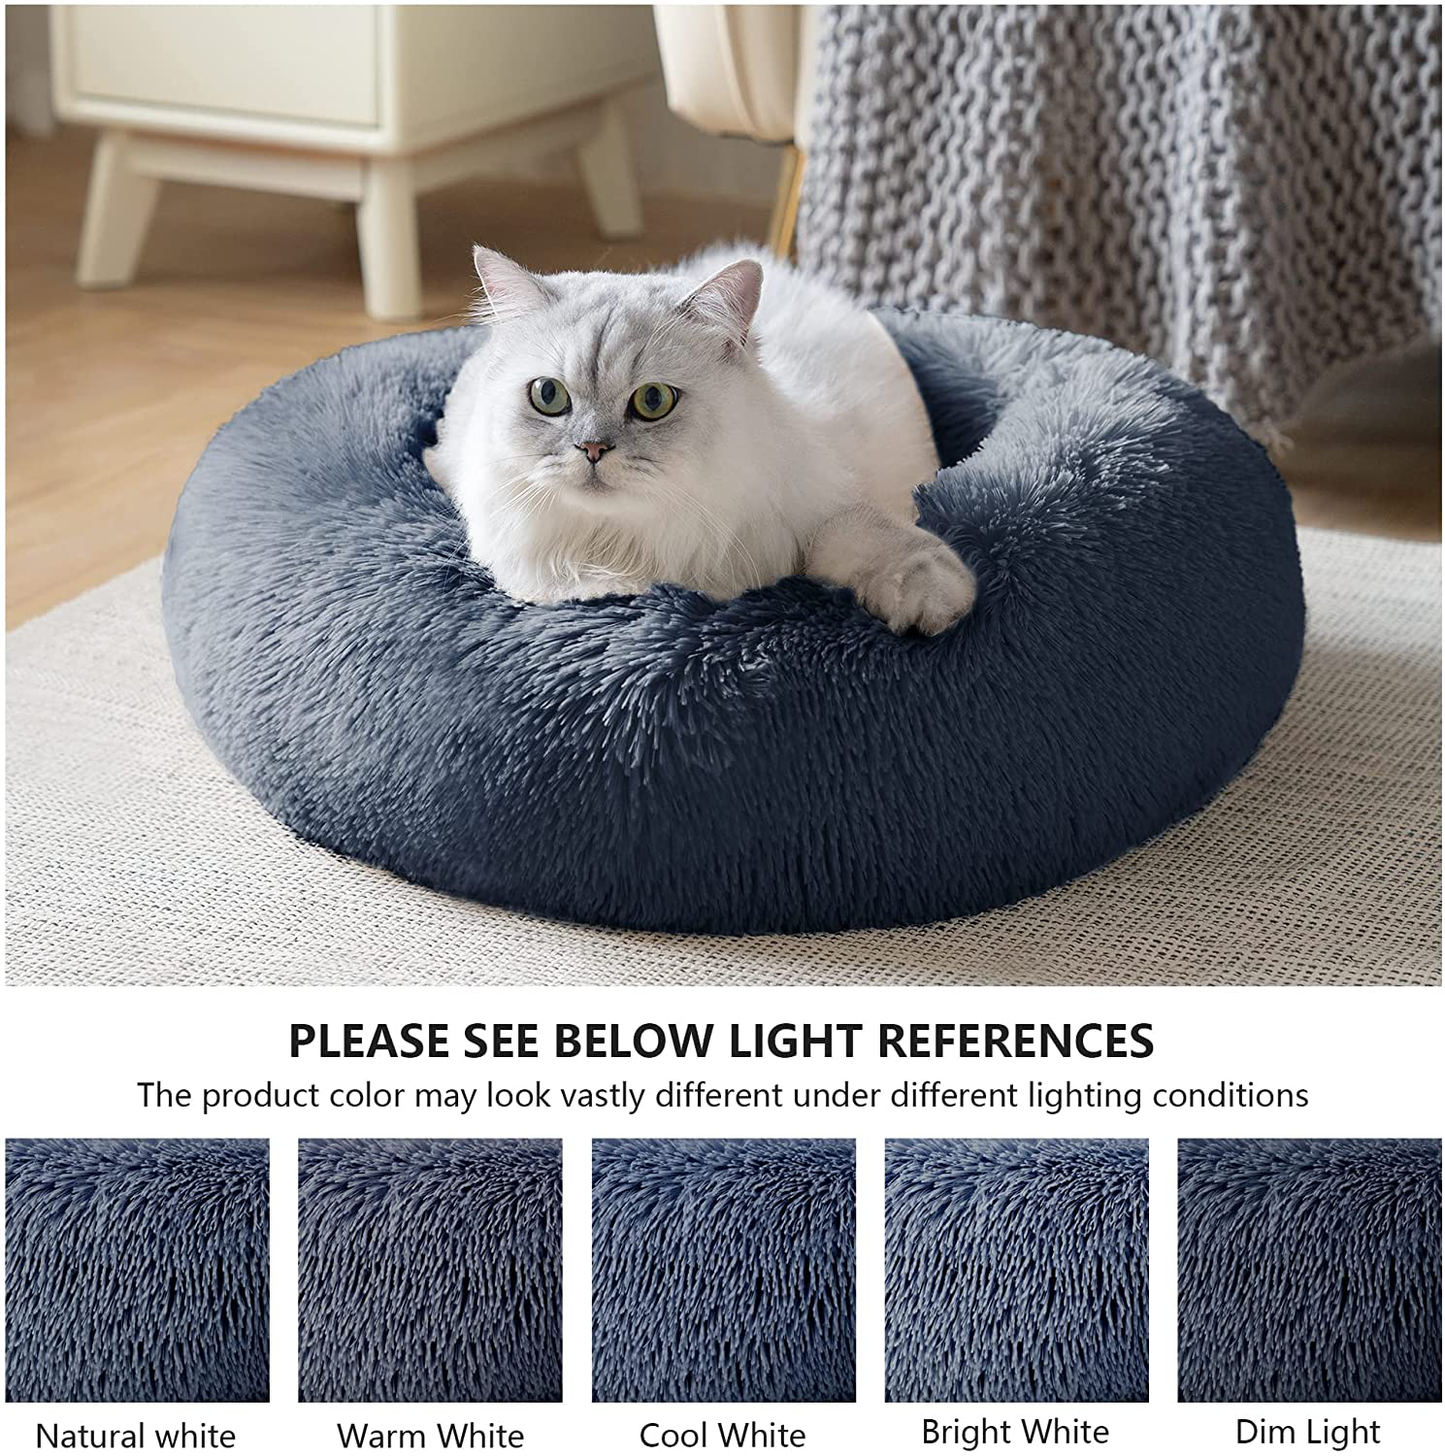 Love'S Cabin Cat Beds for Indoor Cats - Cat Bed with Machine Washable, Waterproof Bottom - Fluffy Dog and Cat Calming Cushion Bed for Joint-Relief and Sleep Improvement